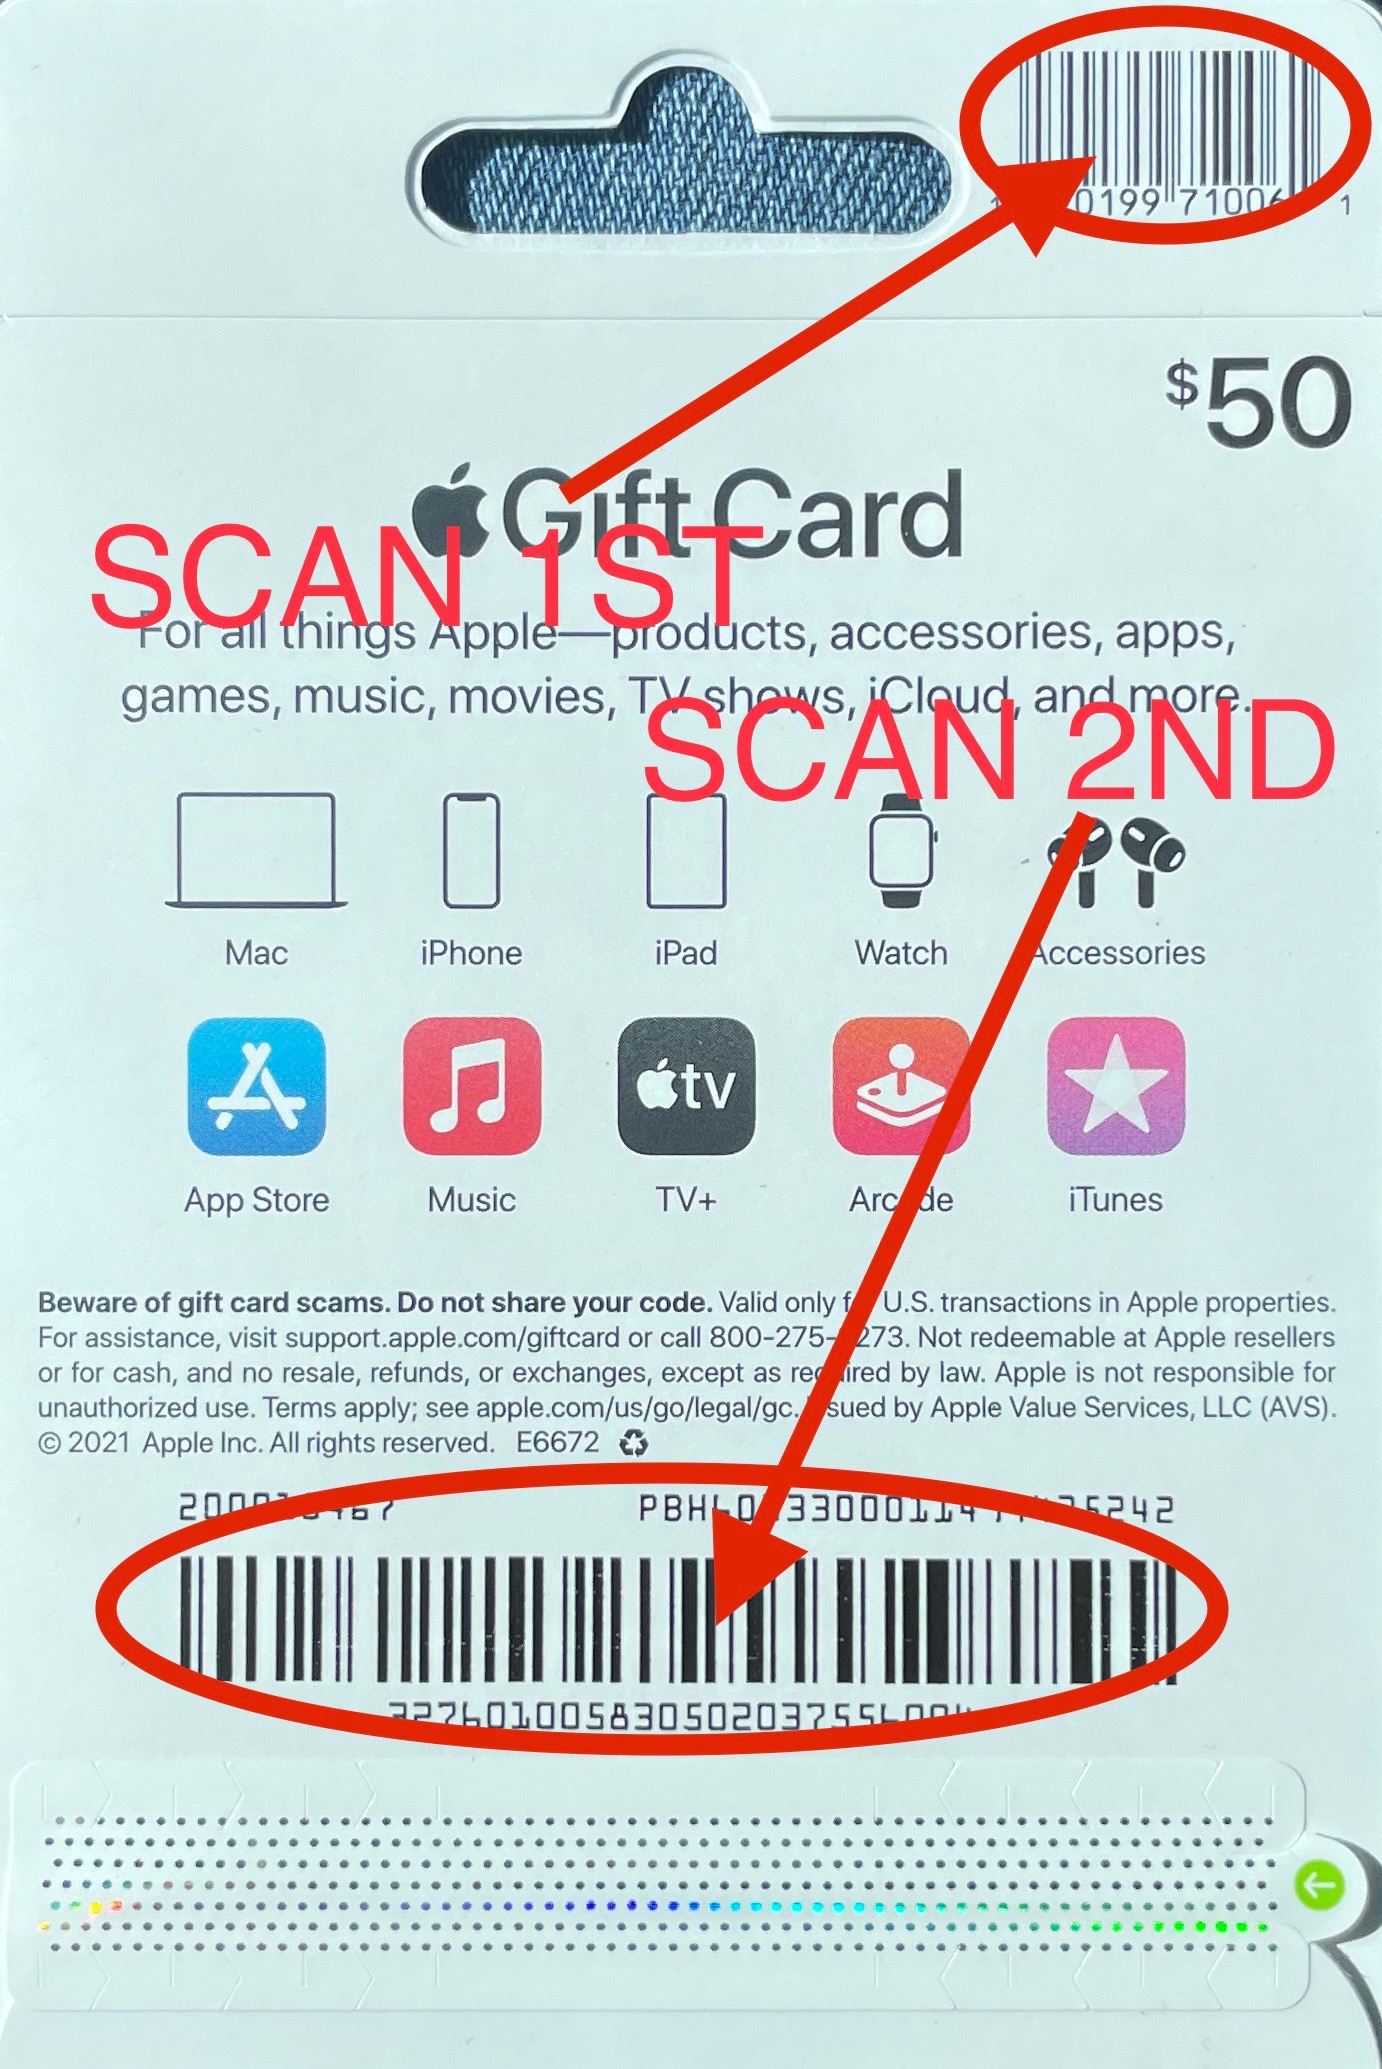 Unable to redeem iTunes Gift Card - Apple Community